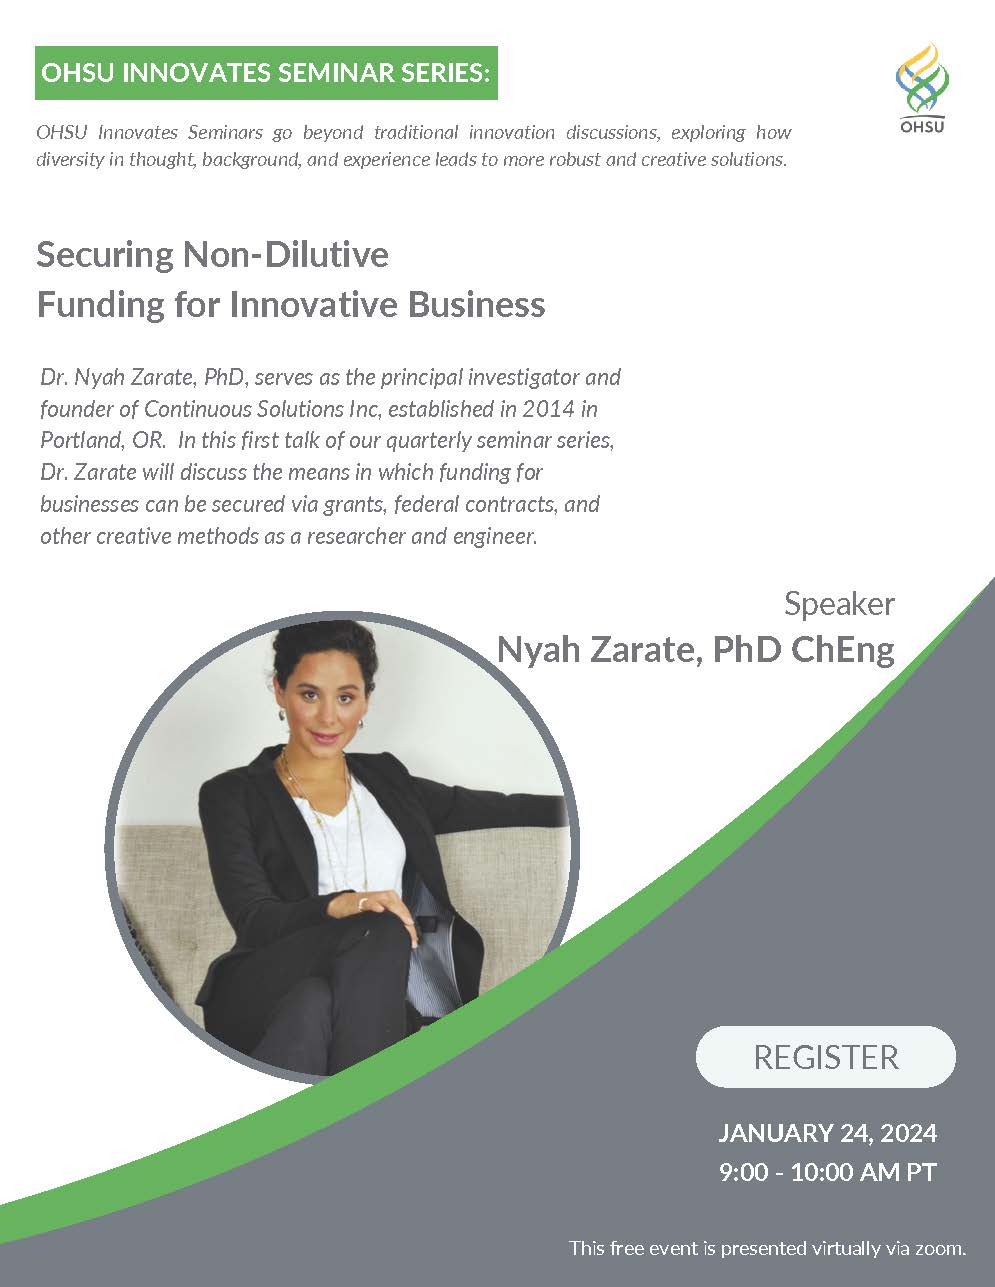 Flyer for OHSU Innovates webinar - includes image of Nyah Zarate